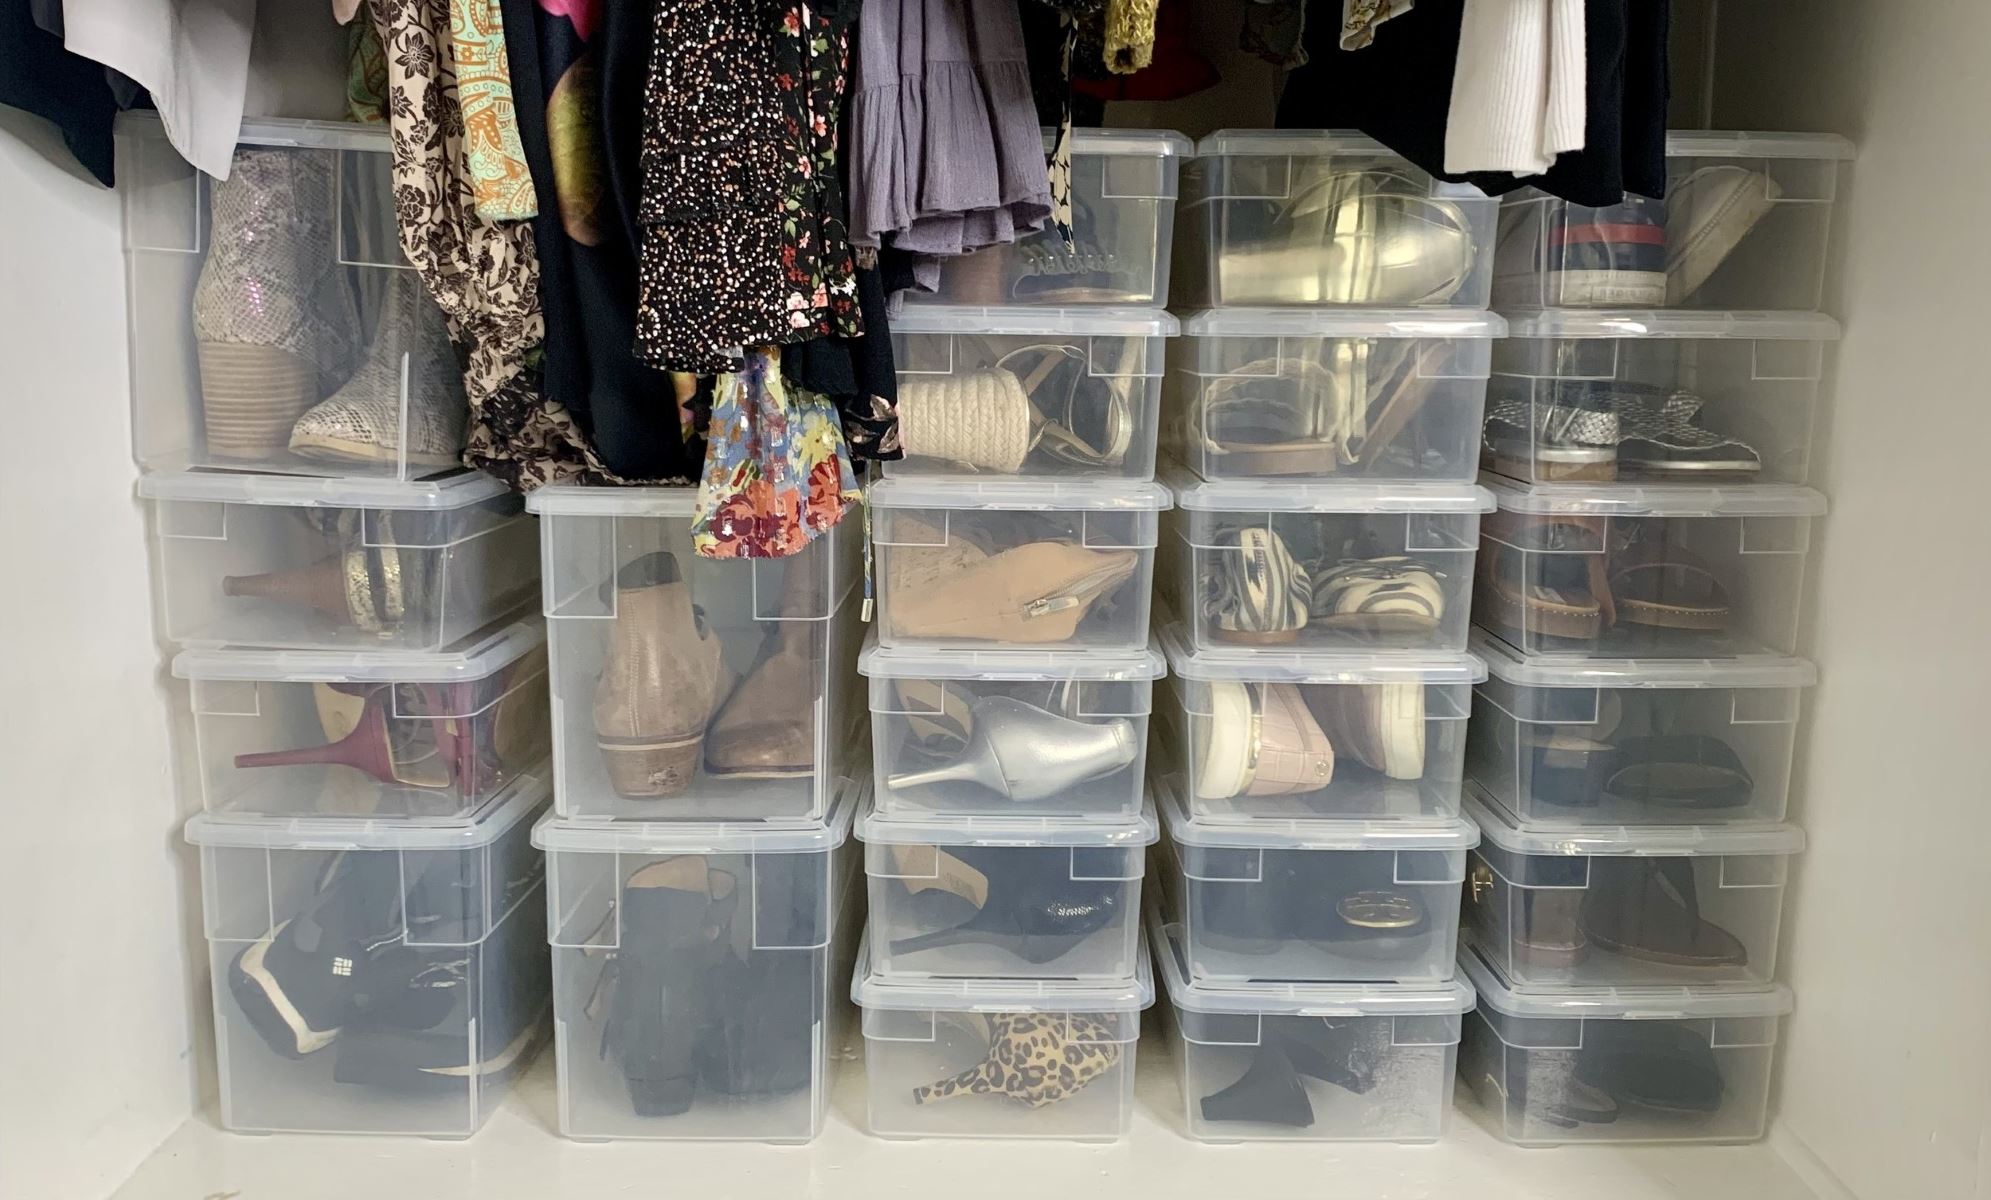 How To Organize Shoe Boxes In Closet